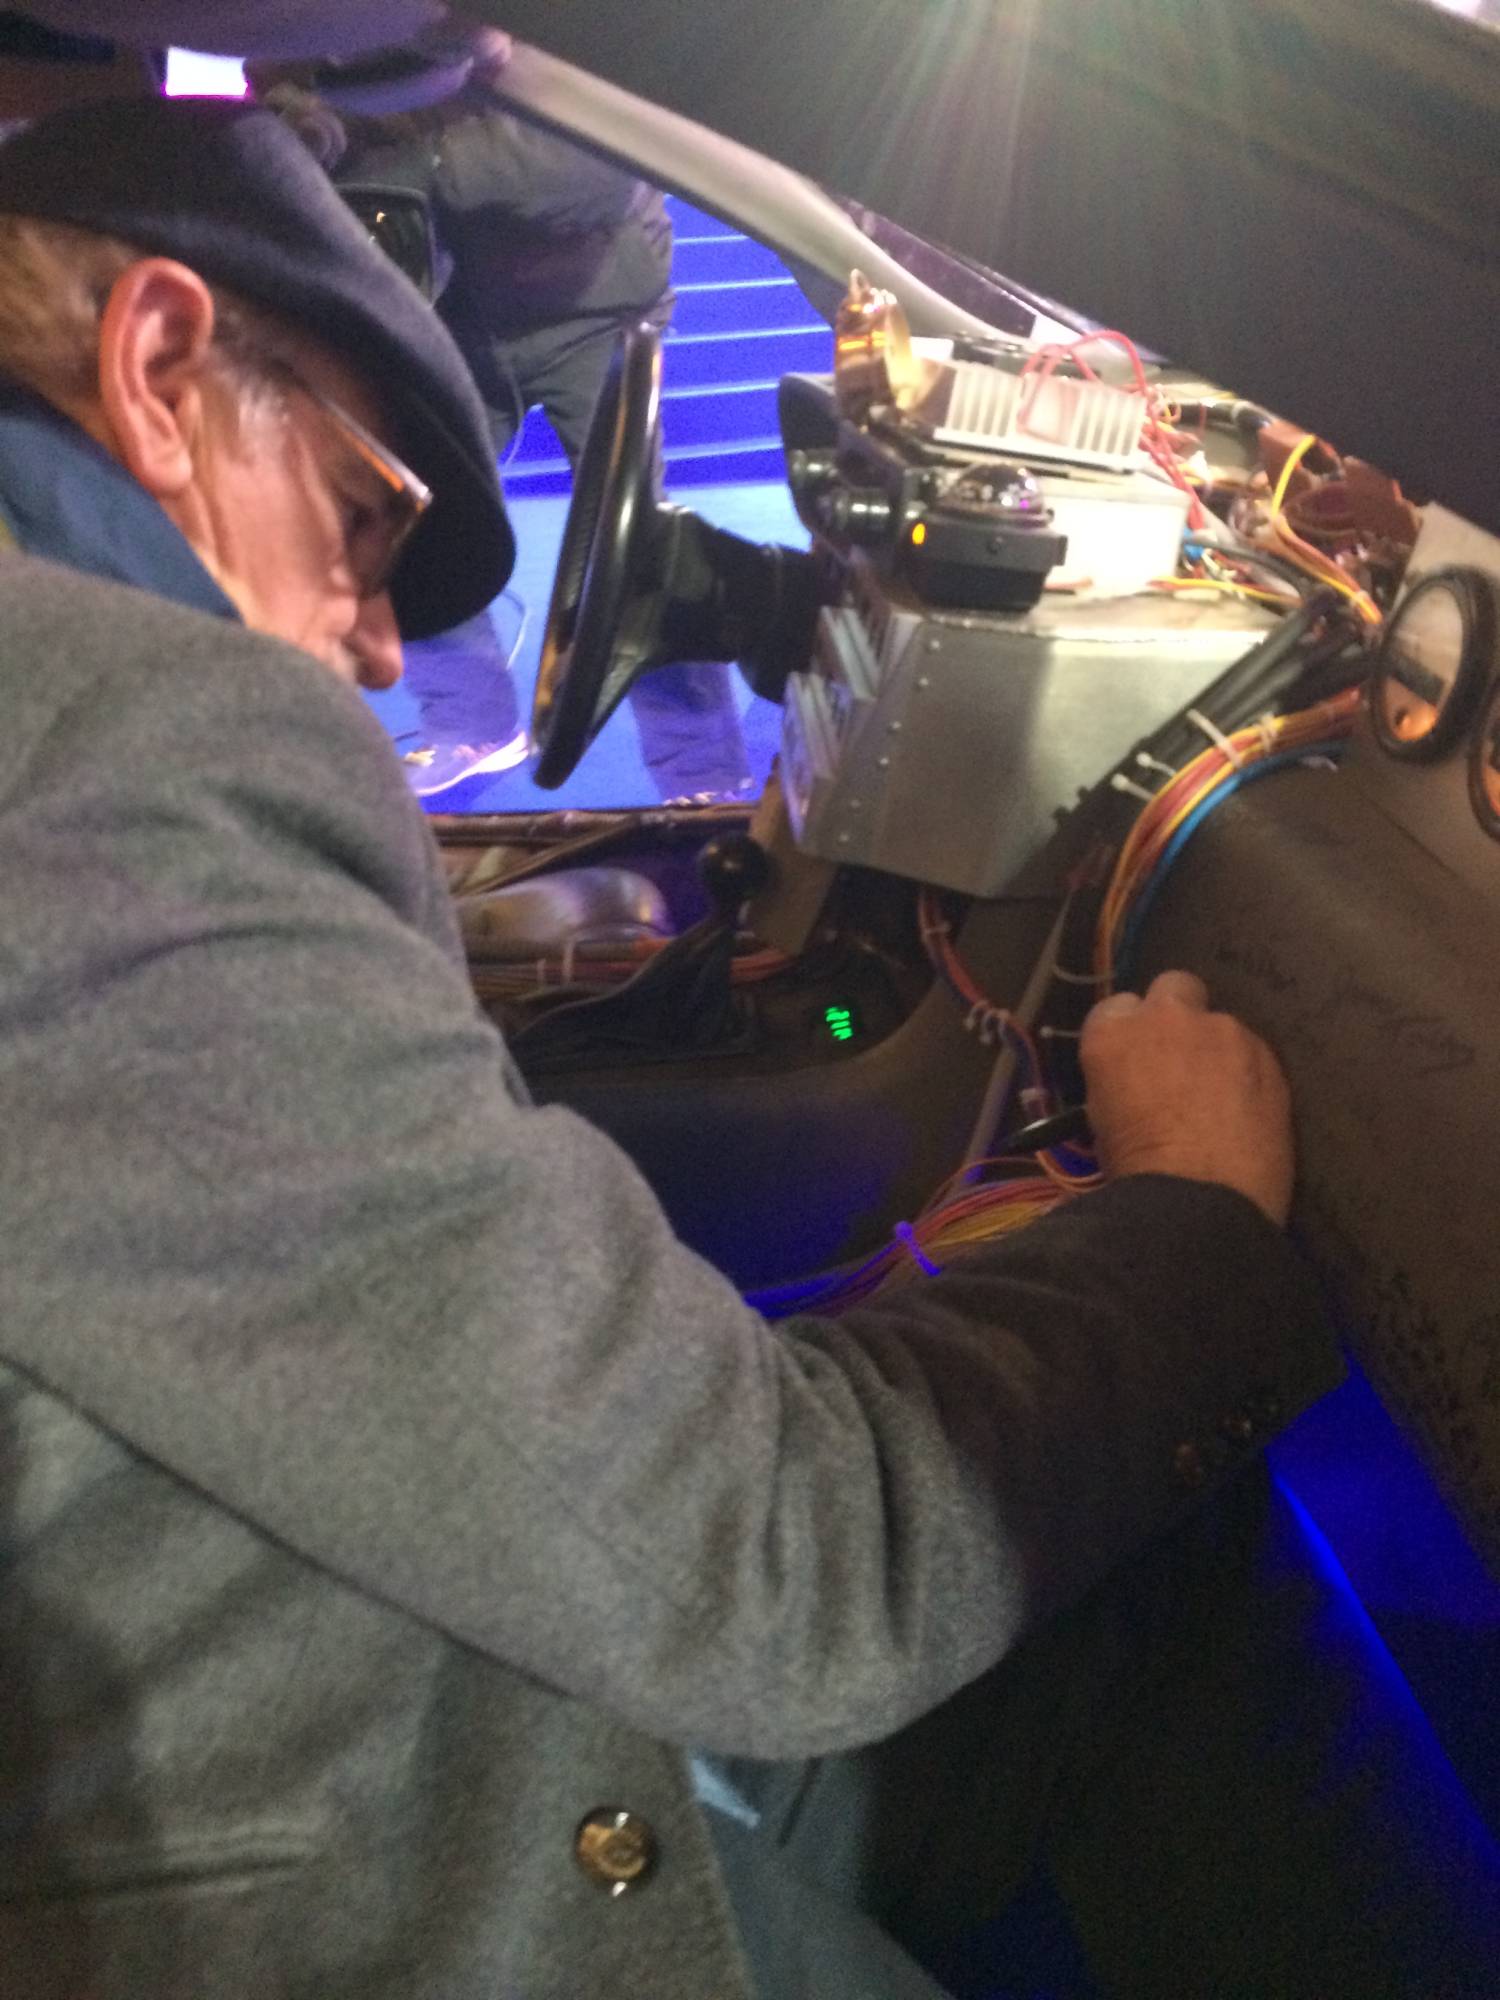 Steven Spielberg signing the BTTF Car DeLorean Time Machine At the European Premiere of Ready Player One 